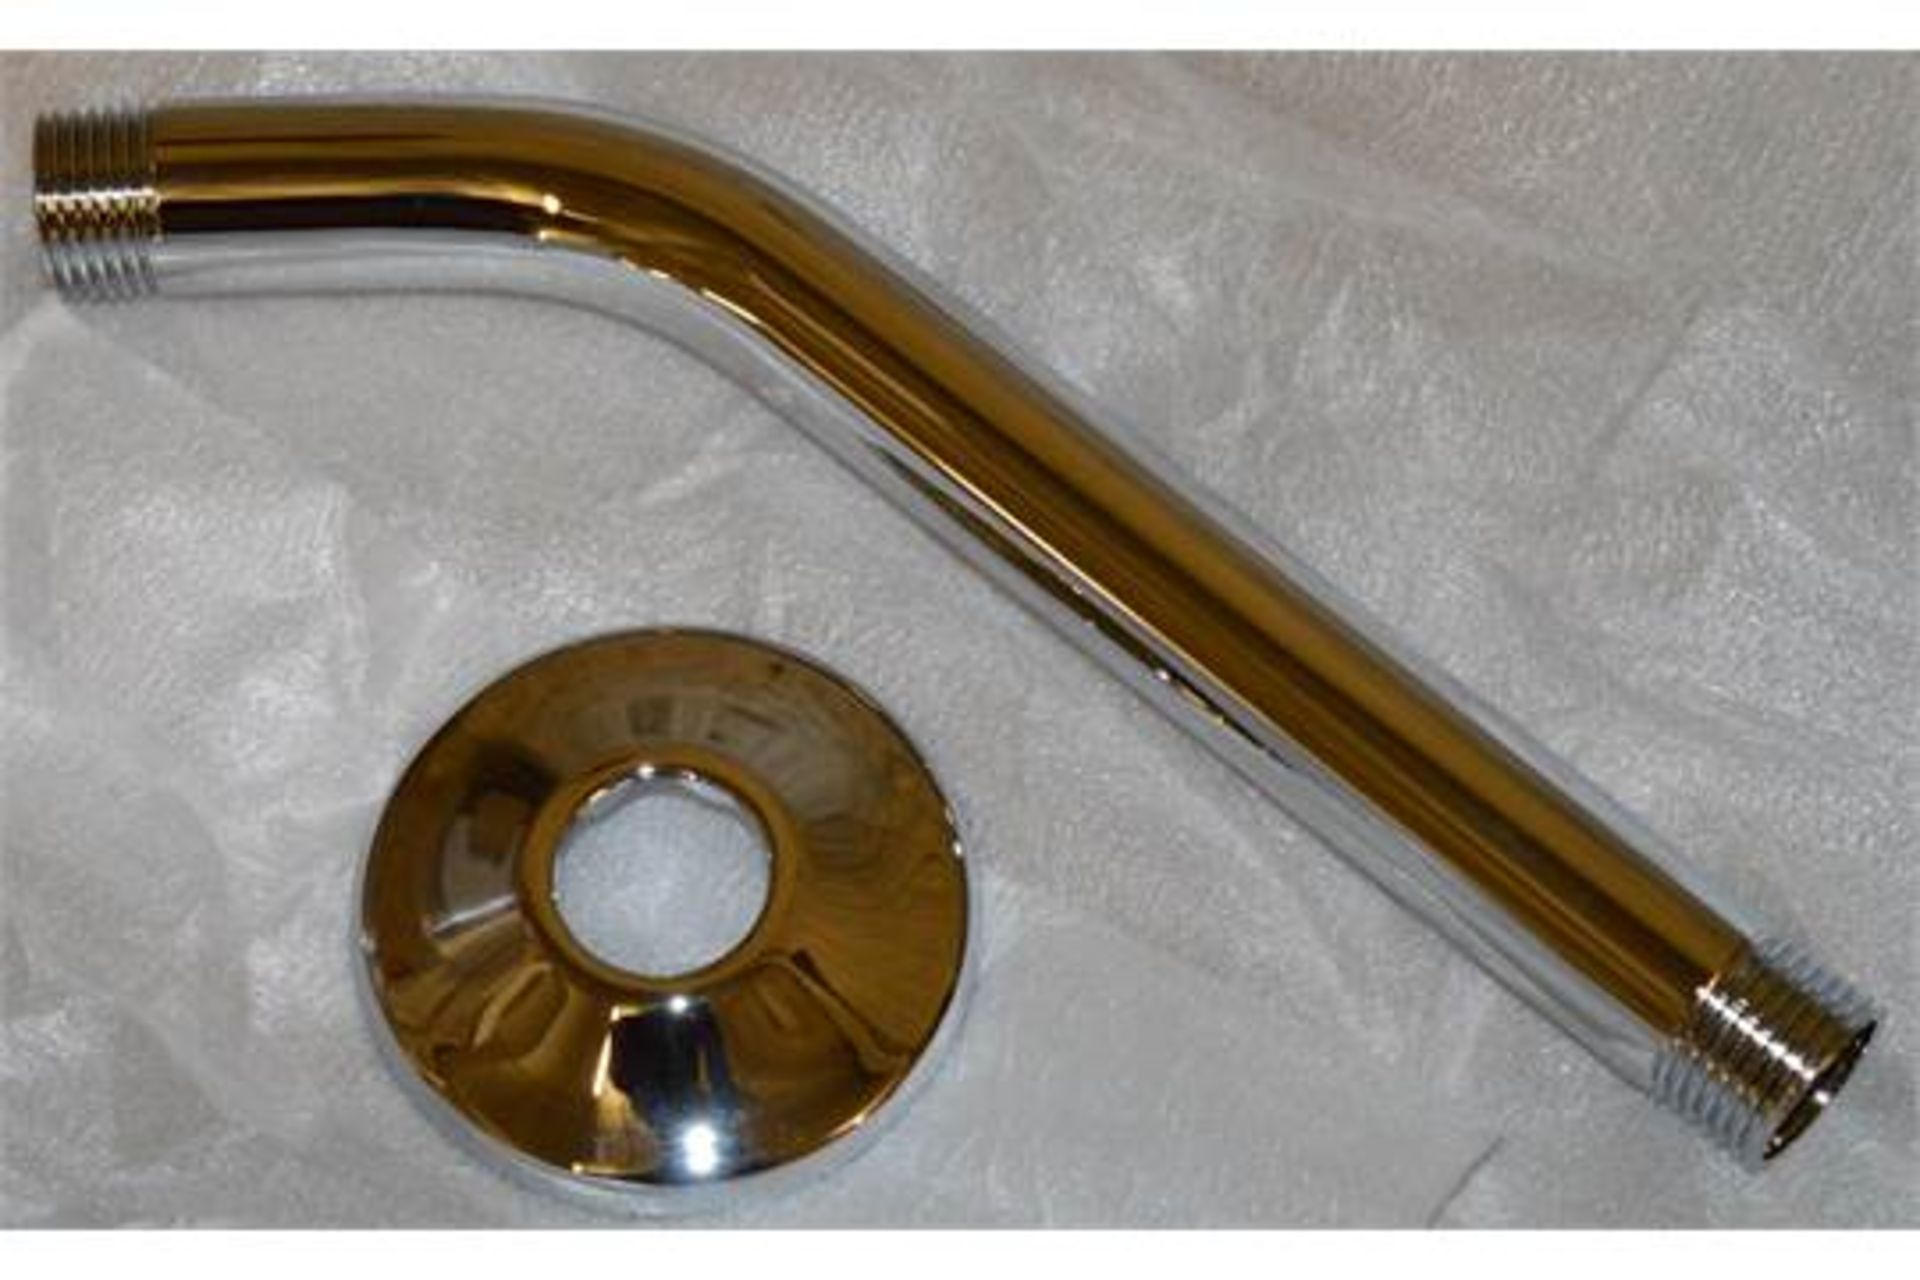 10 x Carmina Shower Arms - Solid Brass With Chrome Finish - Brand New Boxed Stock - Approx RRP £170 - Image 4 of 6